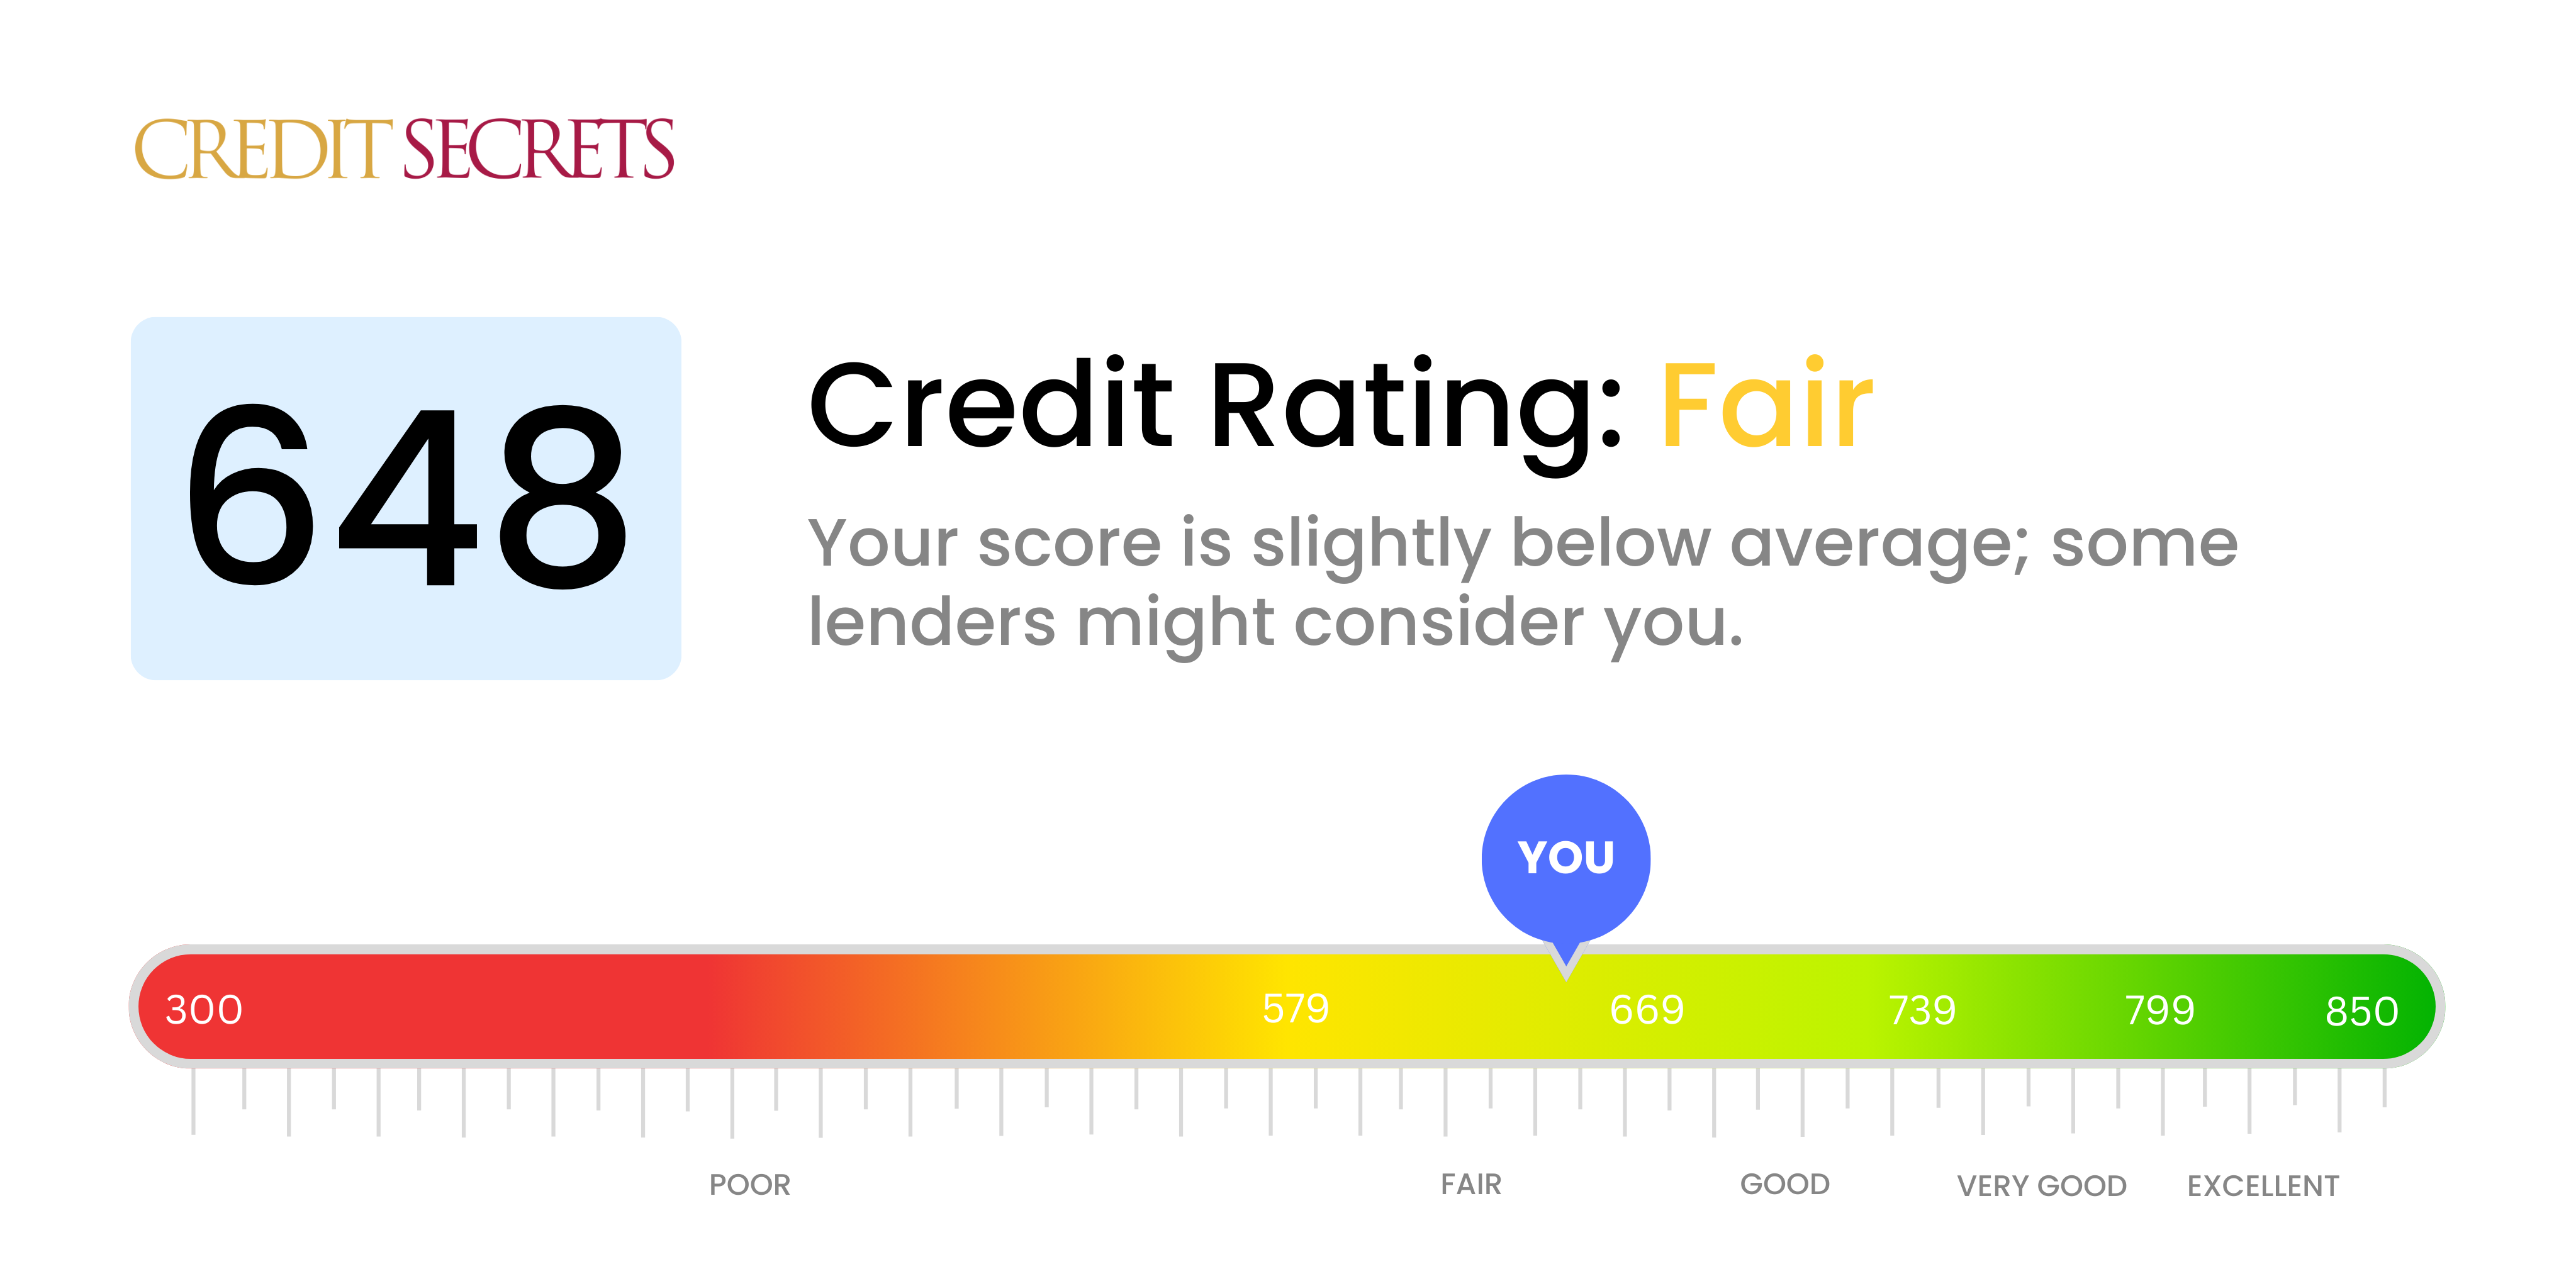 Is 648 a good credit score?